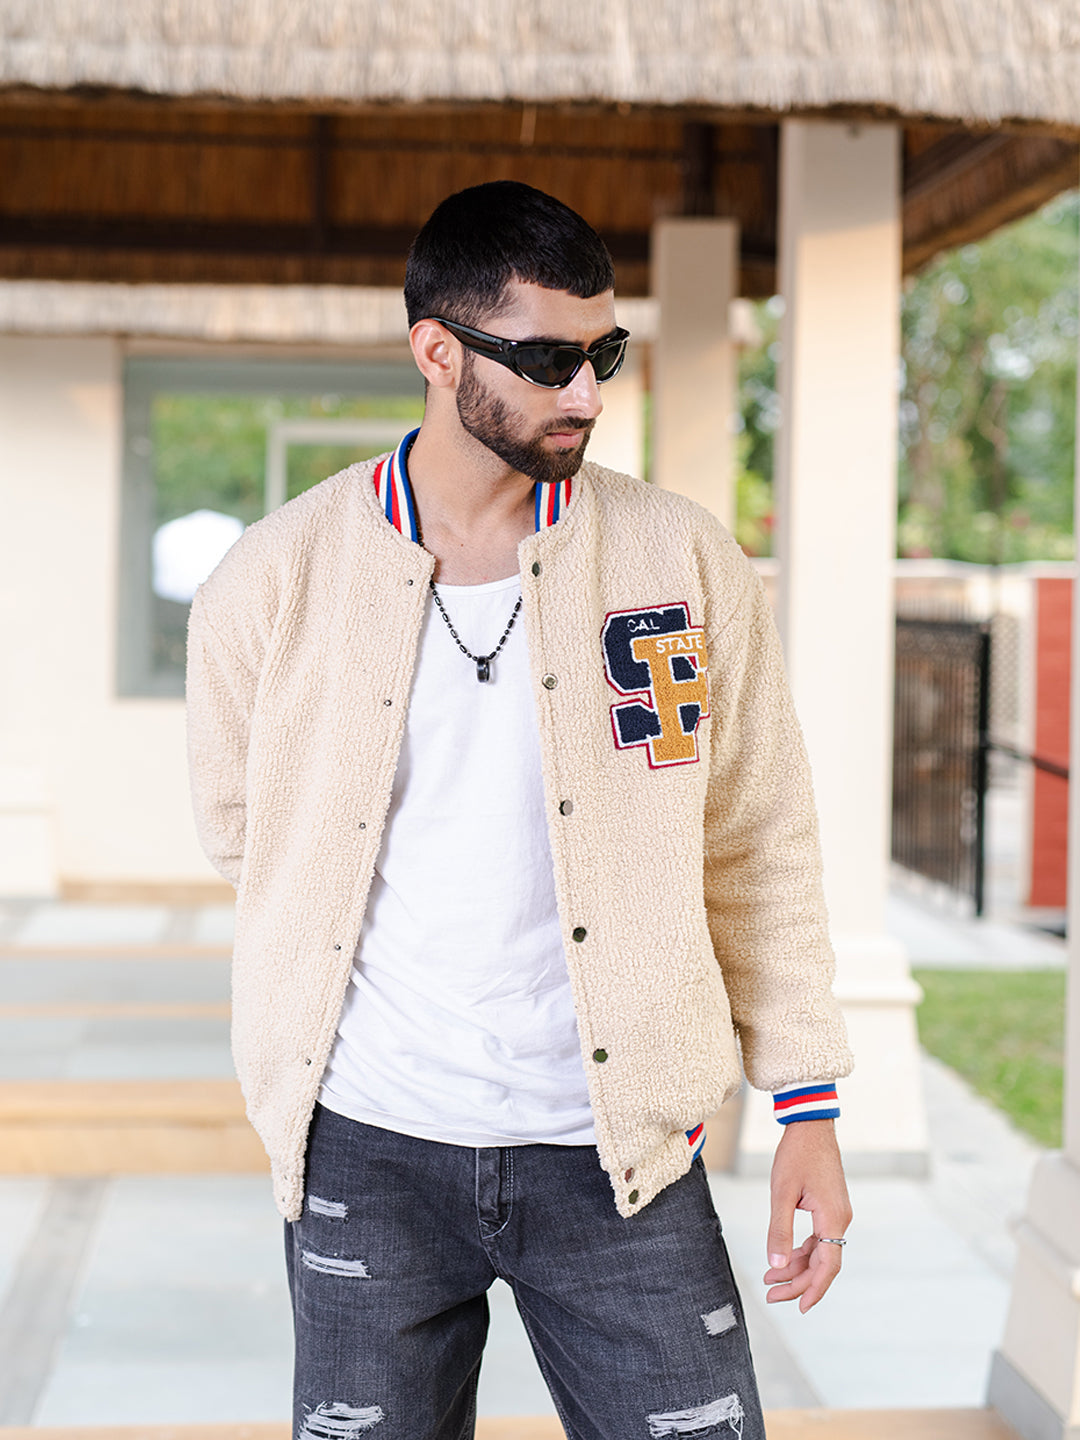 Jackets For Men: 5 Types And How To Style Them